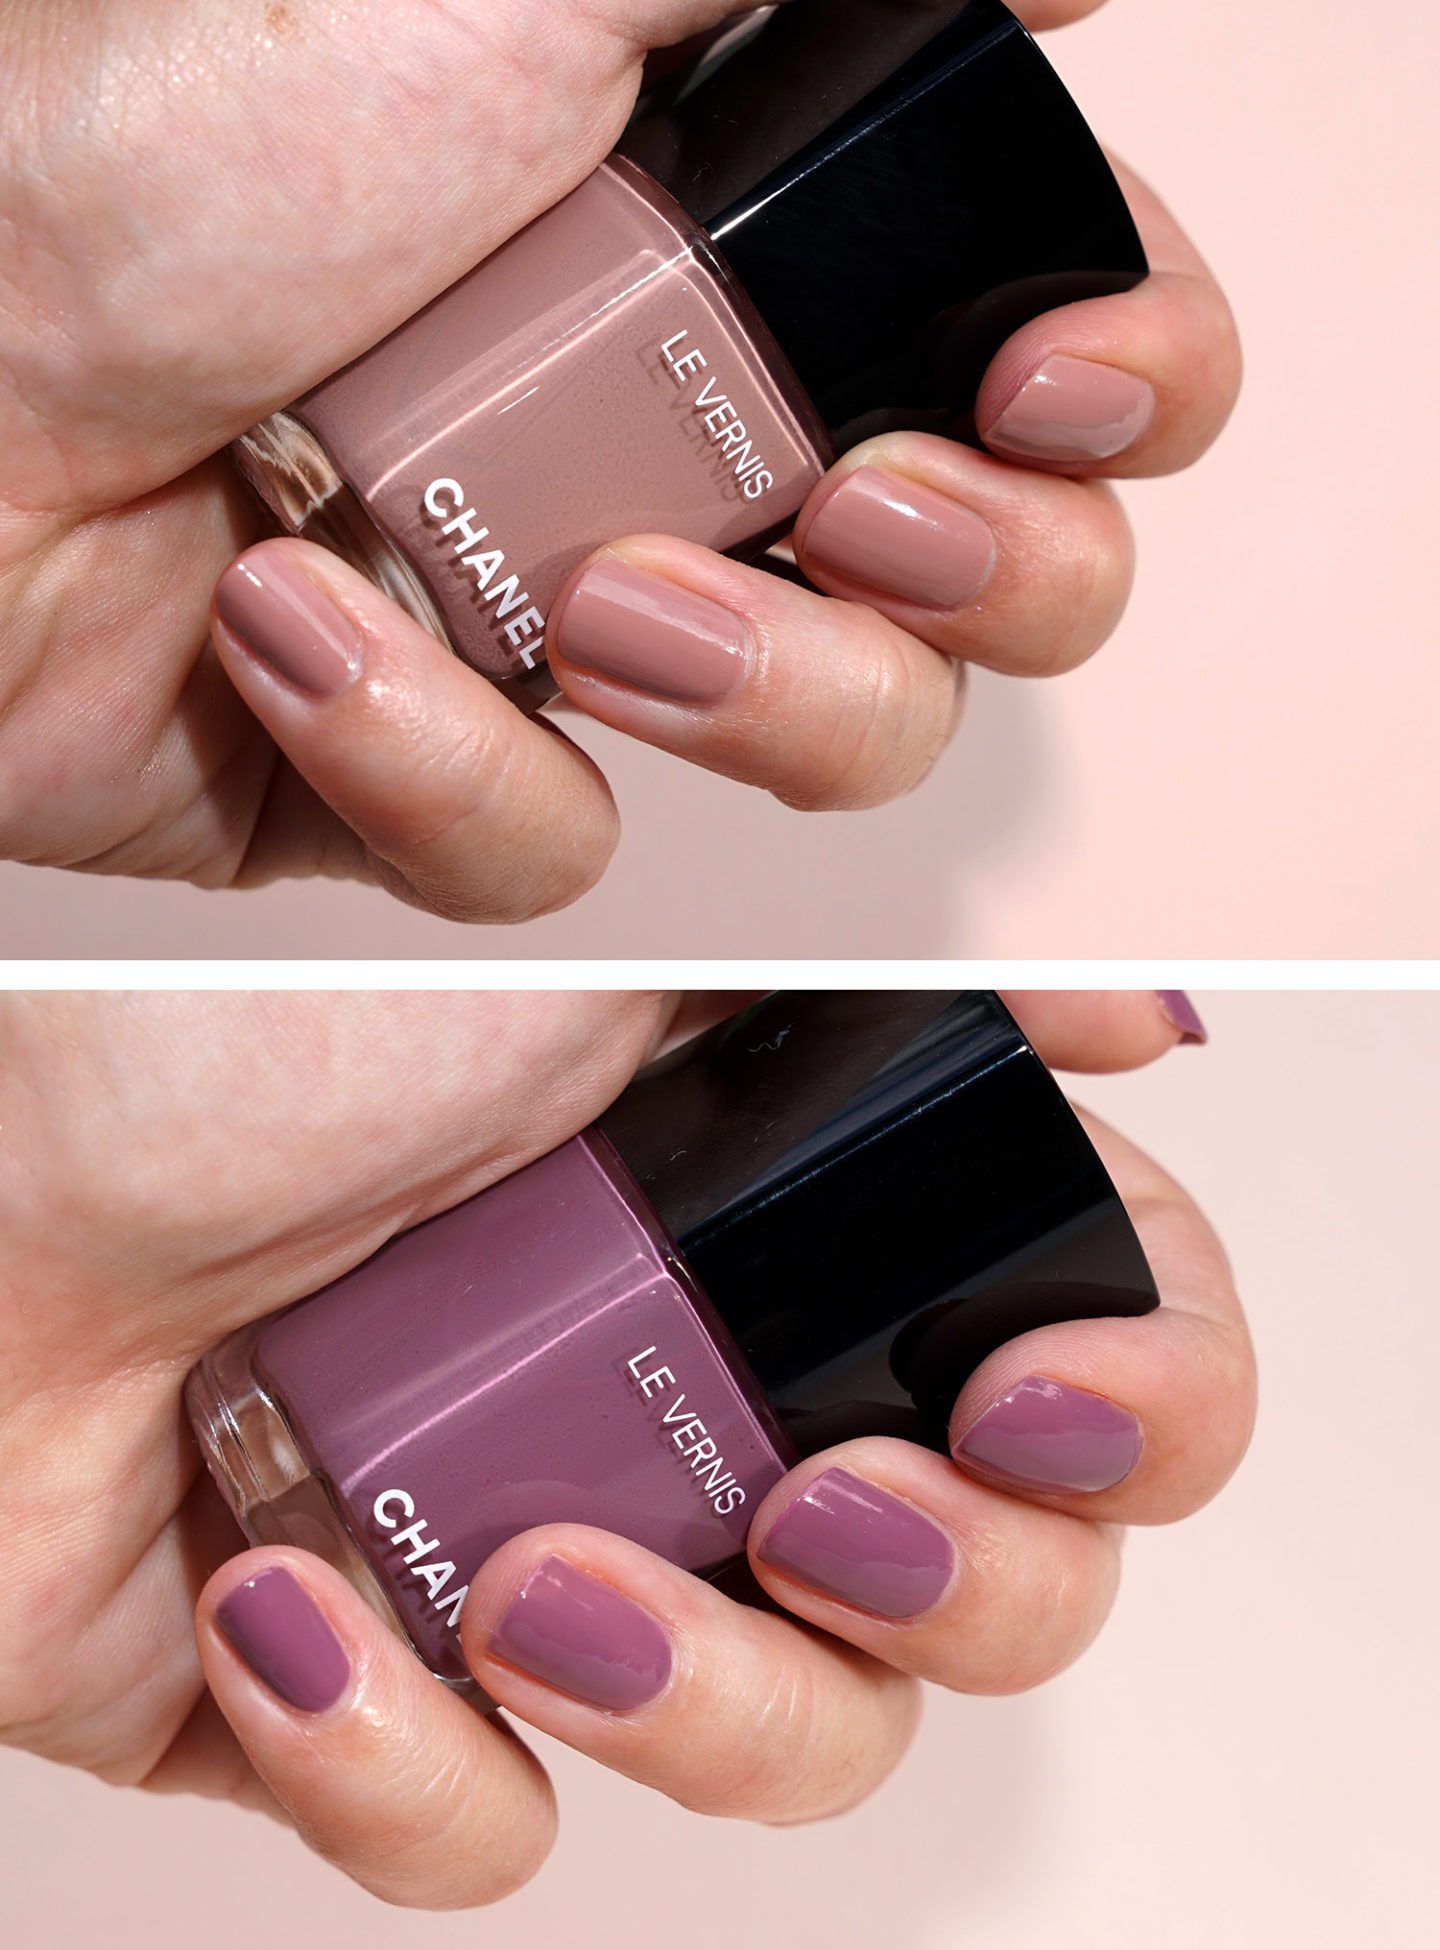 Chanel Spring 2020 Le Vernis Daydream and Mirage swatches